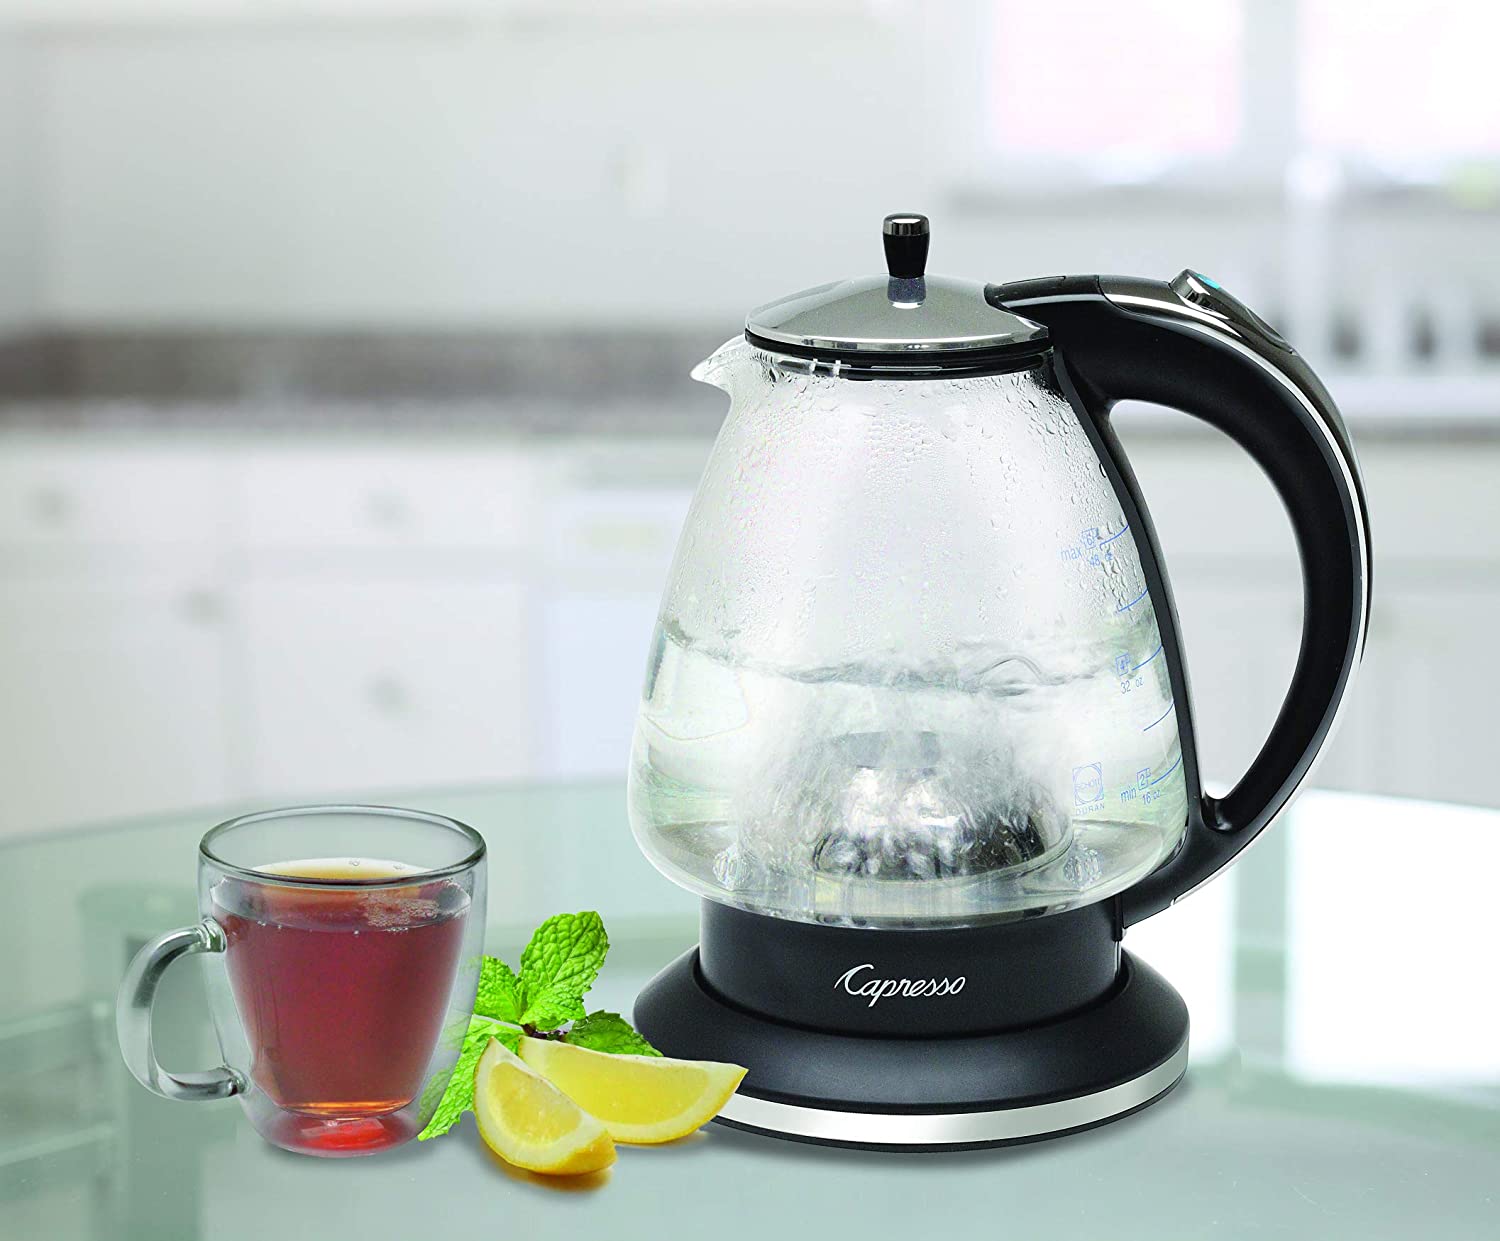 Capresso WATERKETTLE-RB 240.98 H2O Glass Electric Water Kettle Stainless Steel - Refurbished